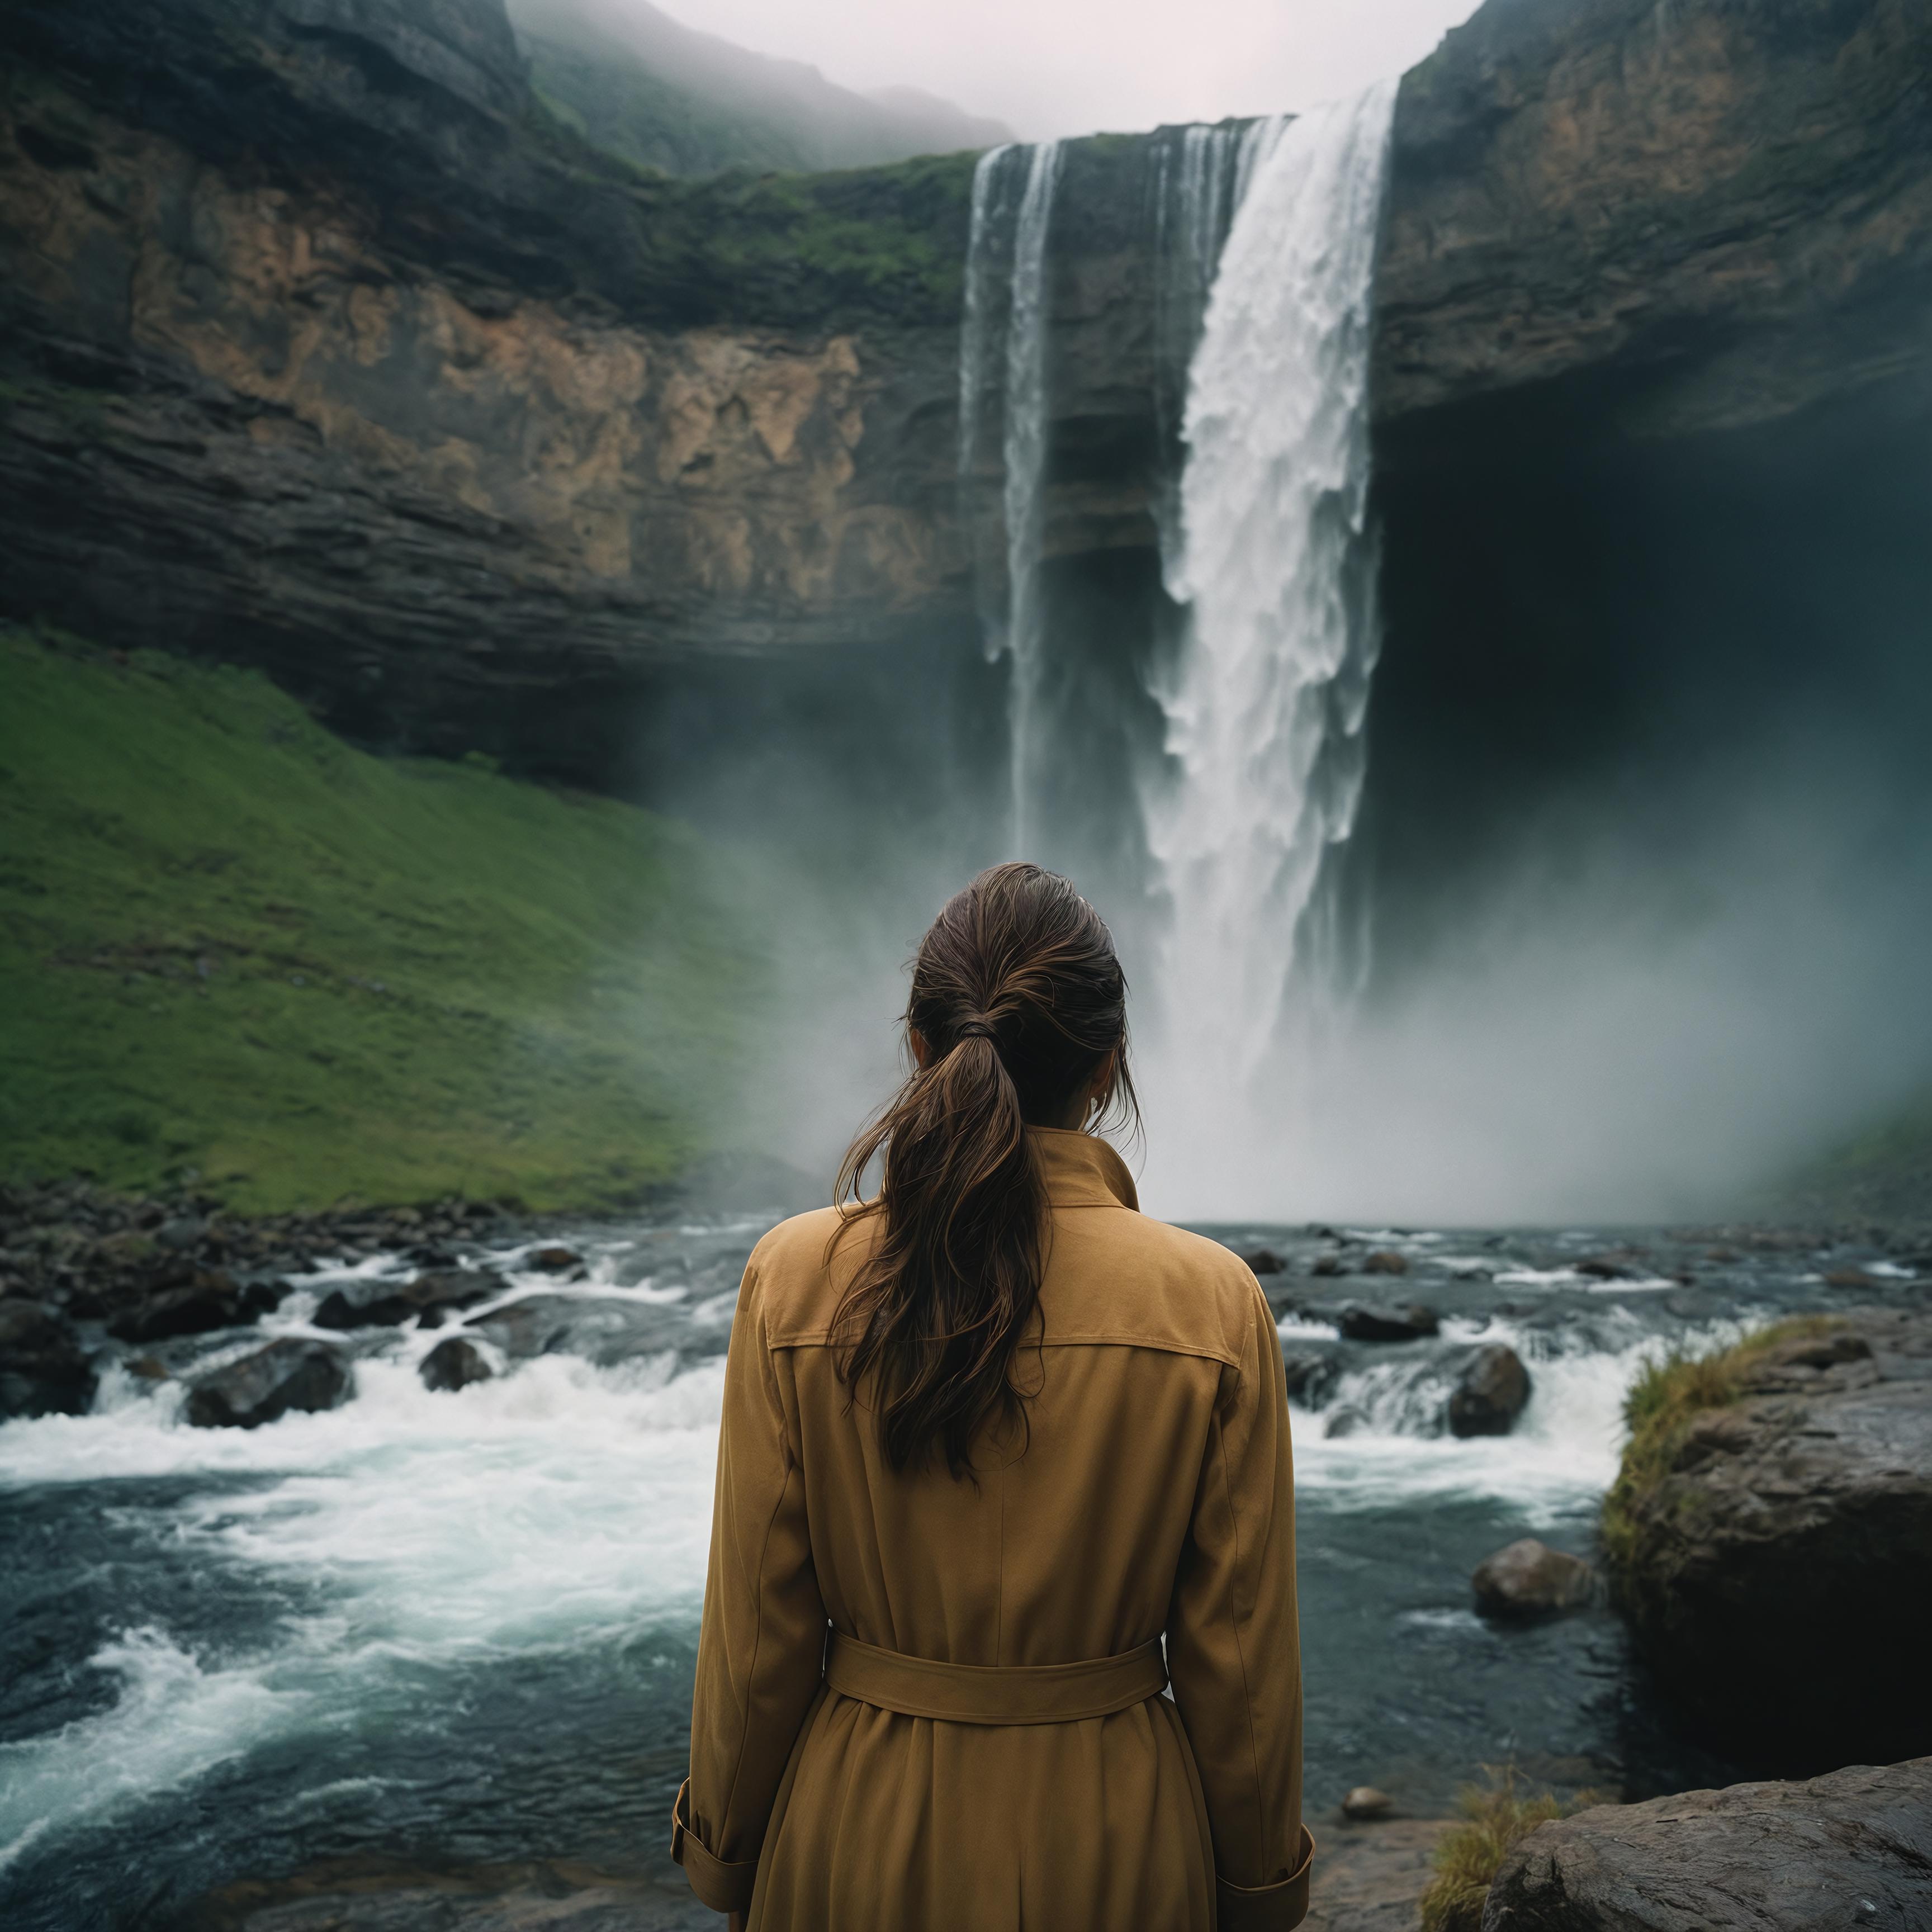 A woman in a dress standing by a waterfall.